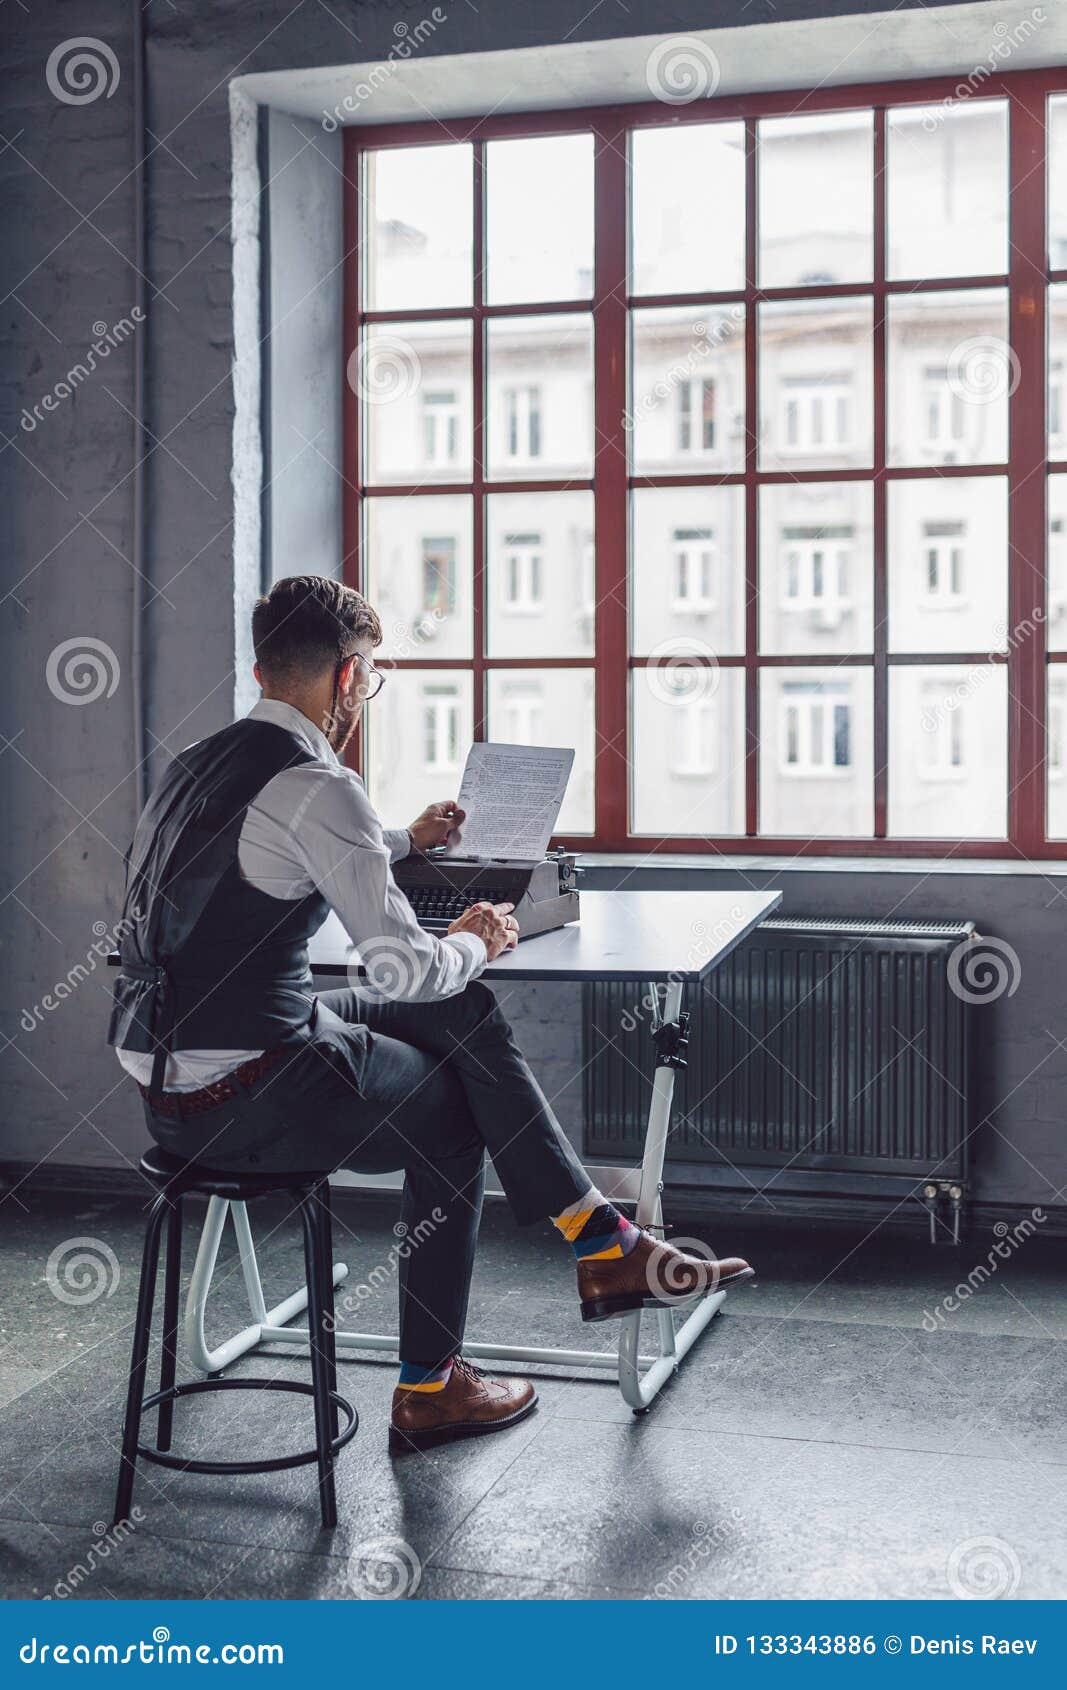 young screenwriter reading the script by the window